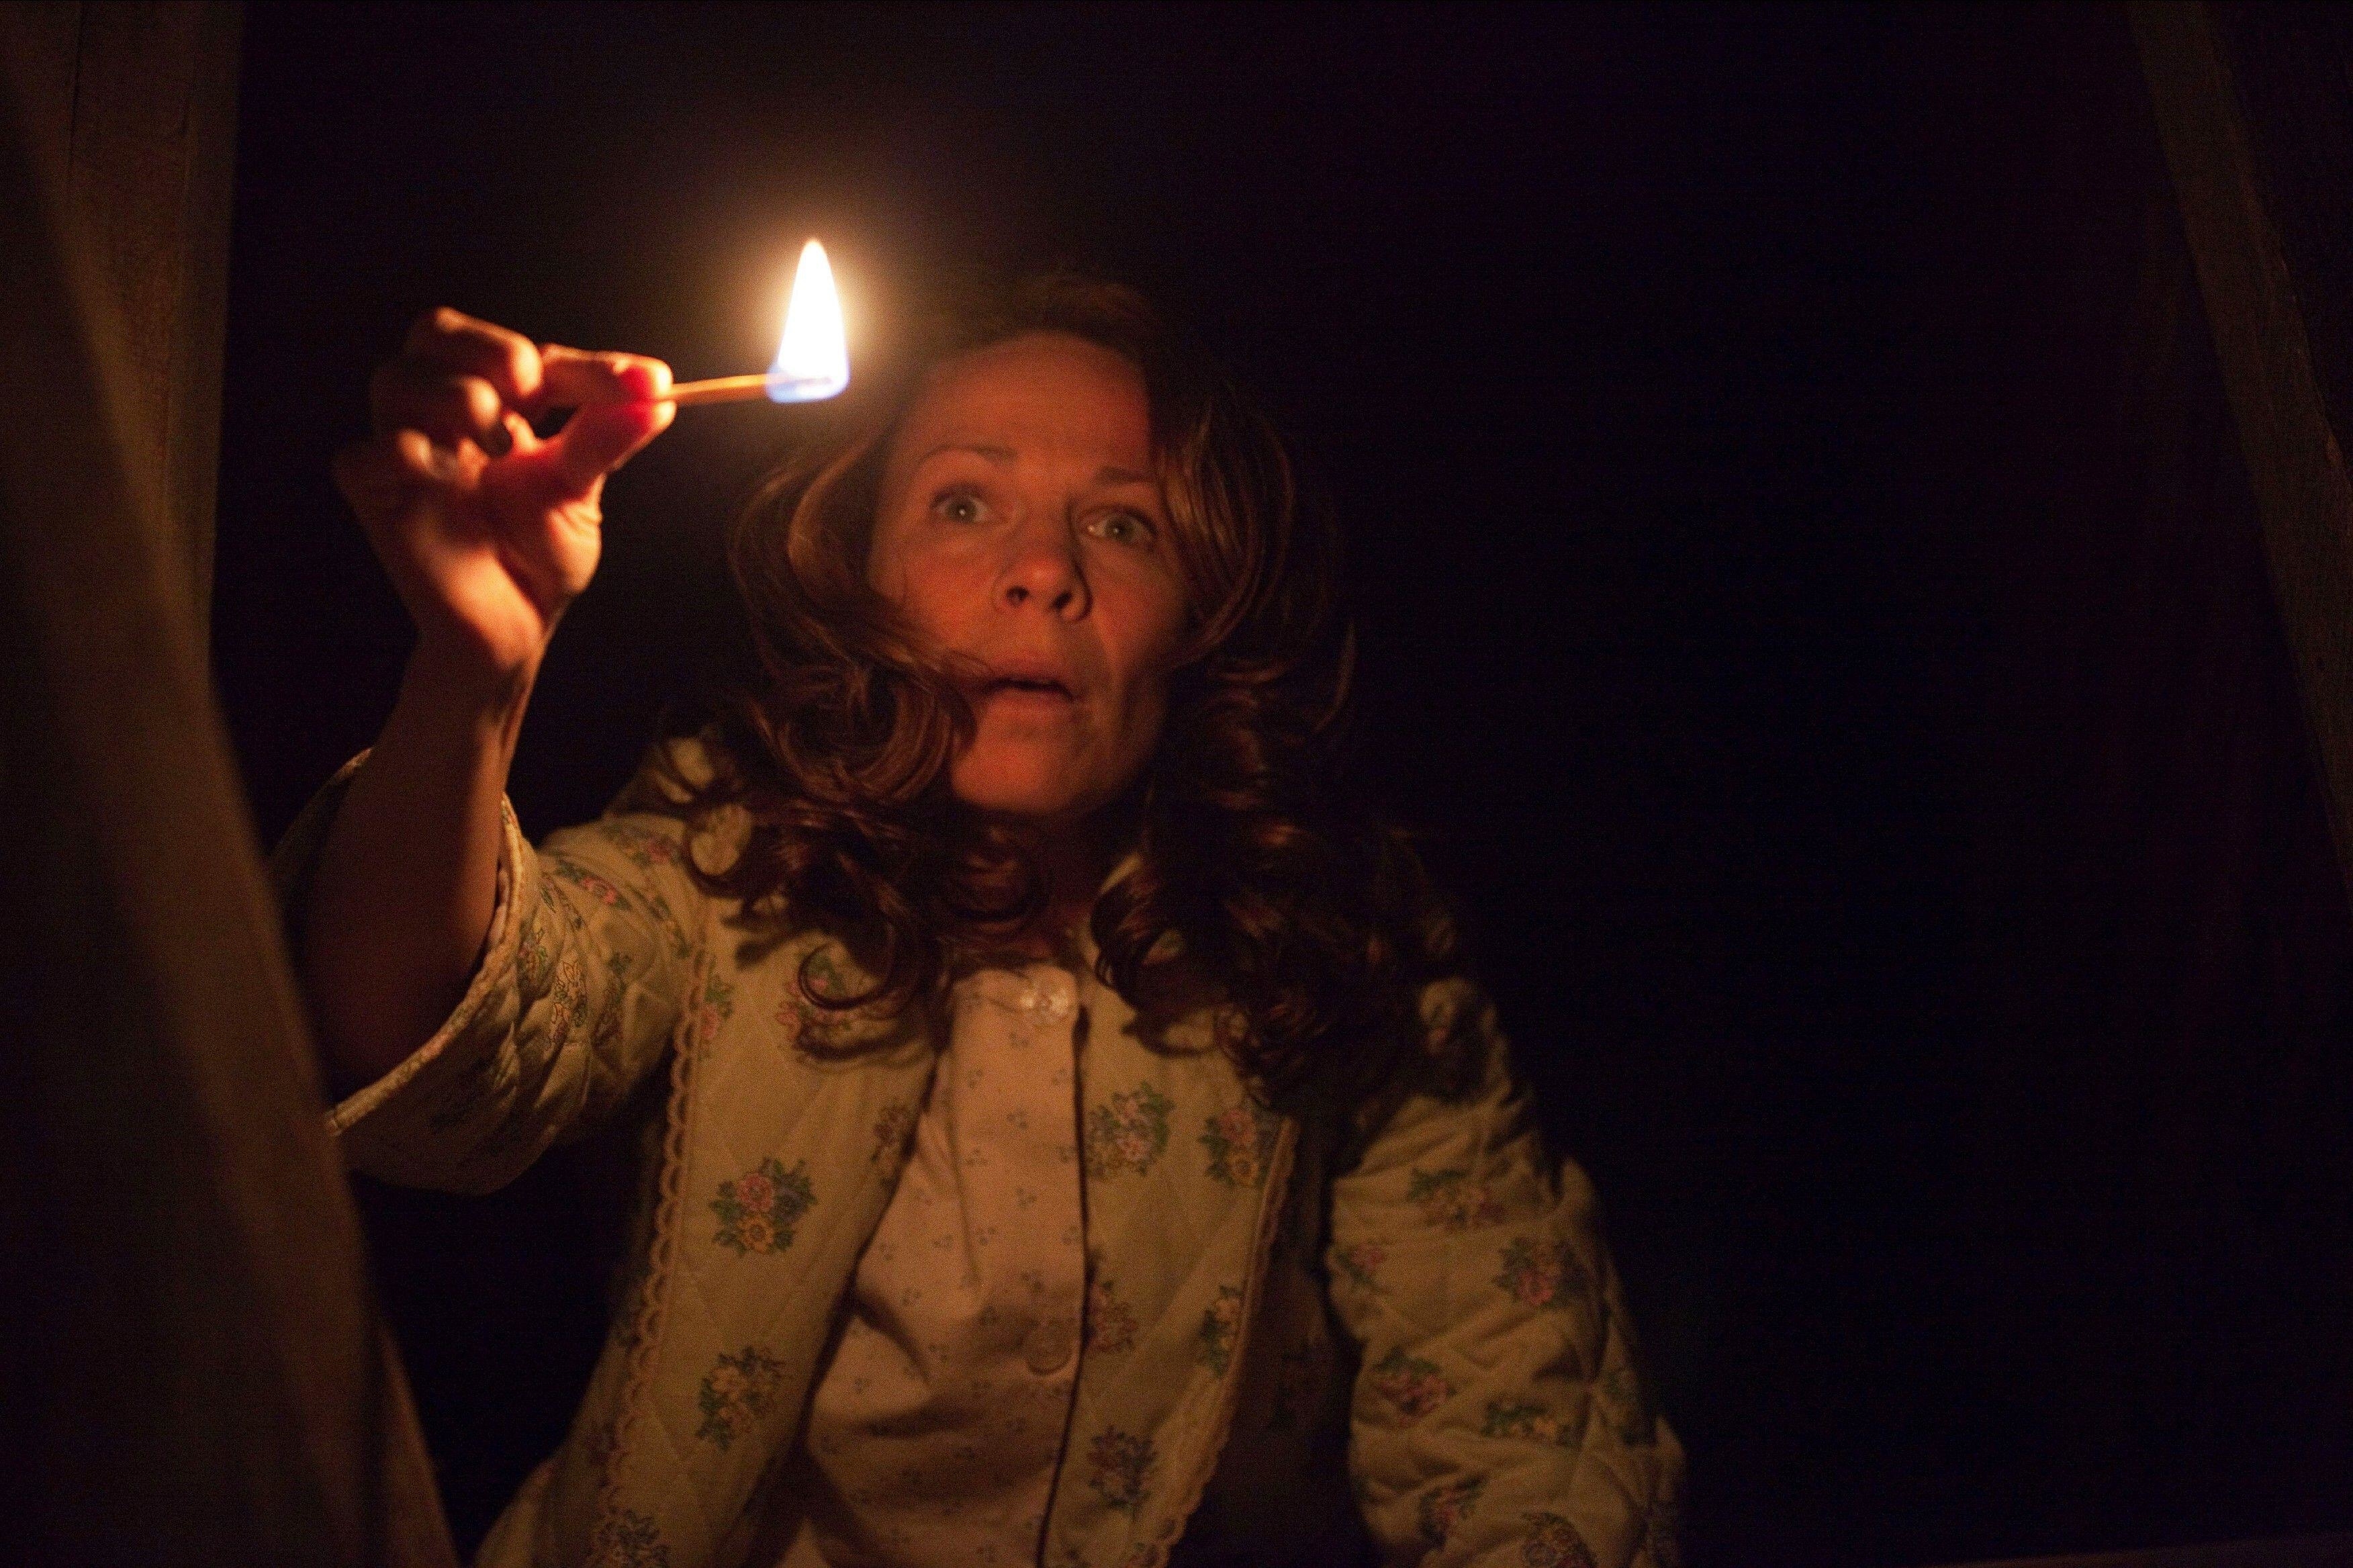 Lili Taylor in The Conjuring